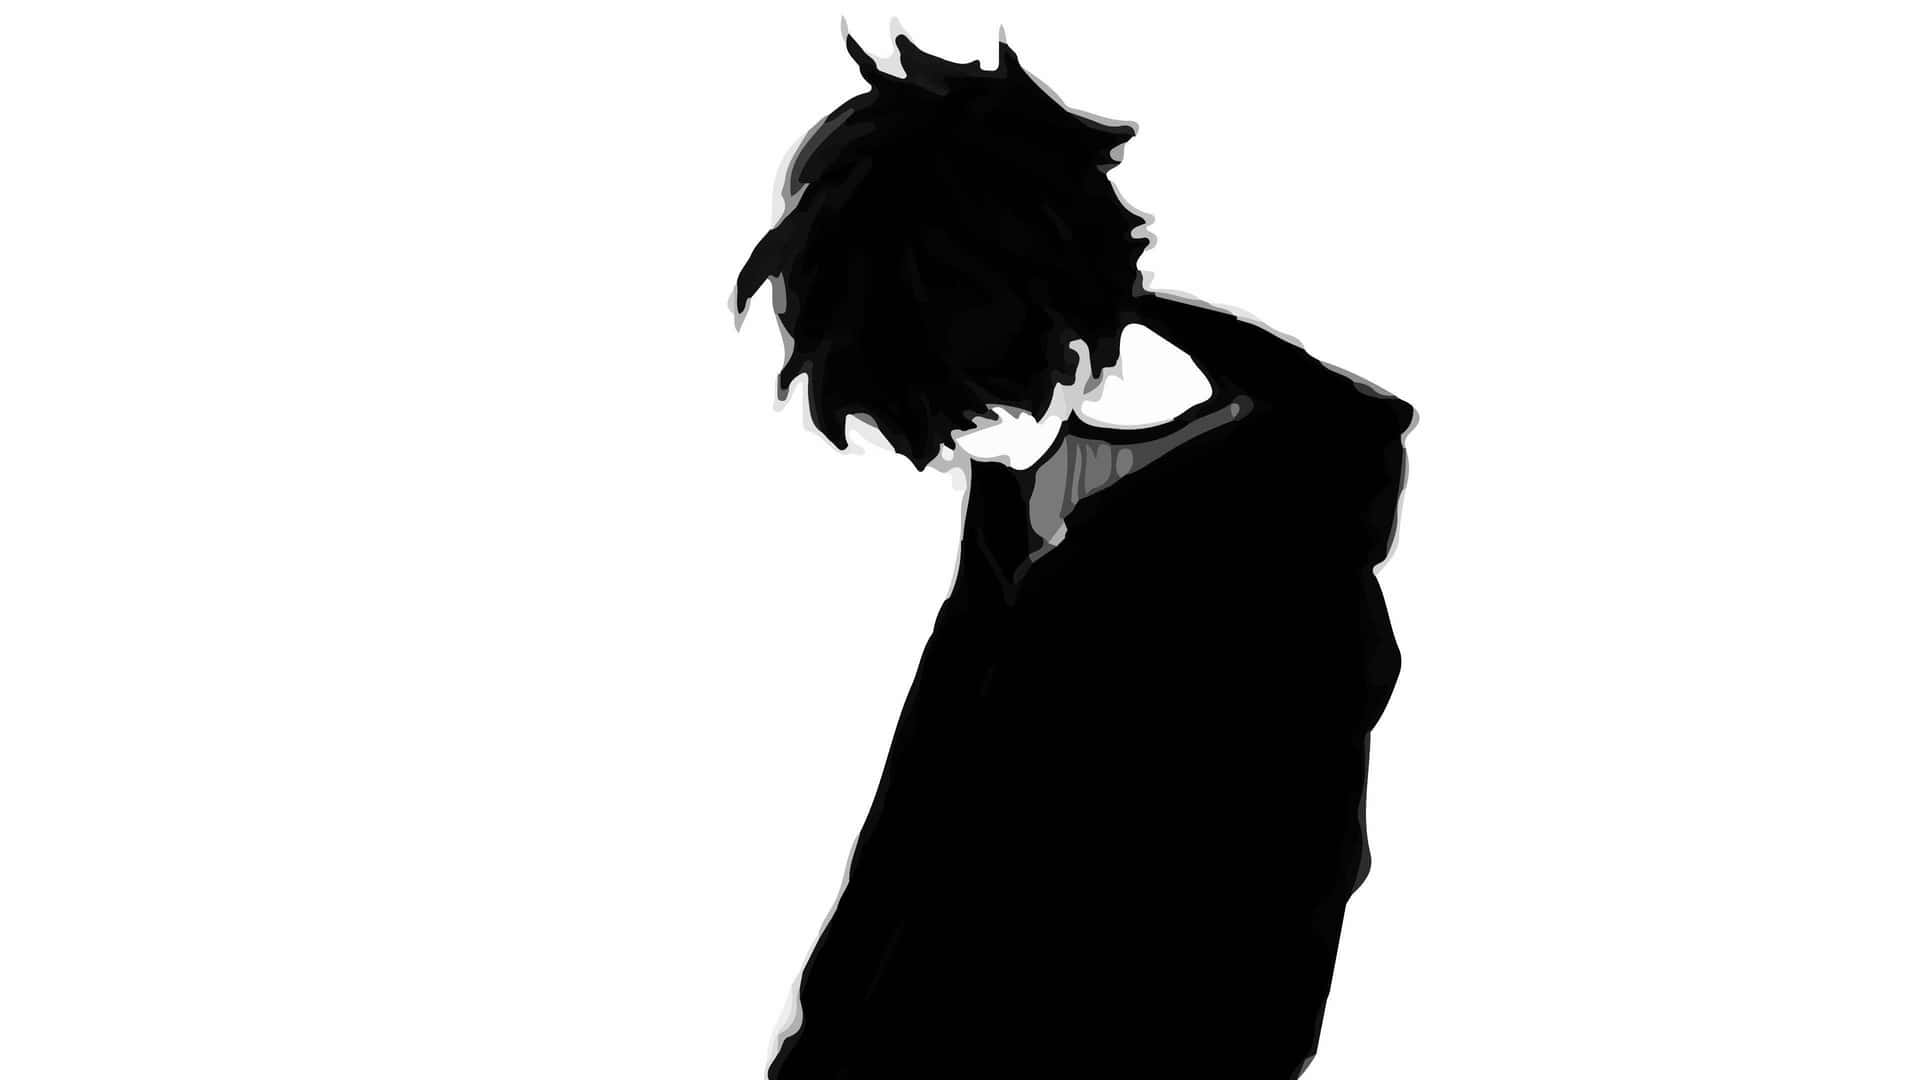 A melancholic portrait of a black and white anime character. Wallpaper